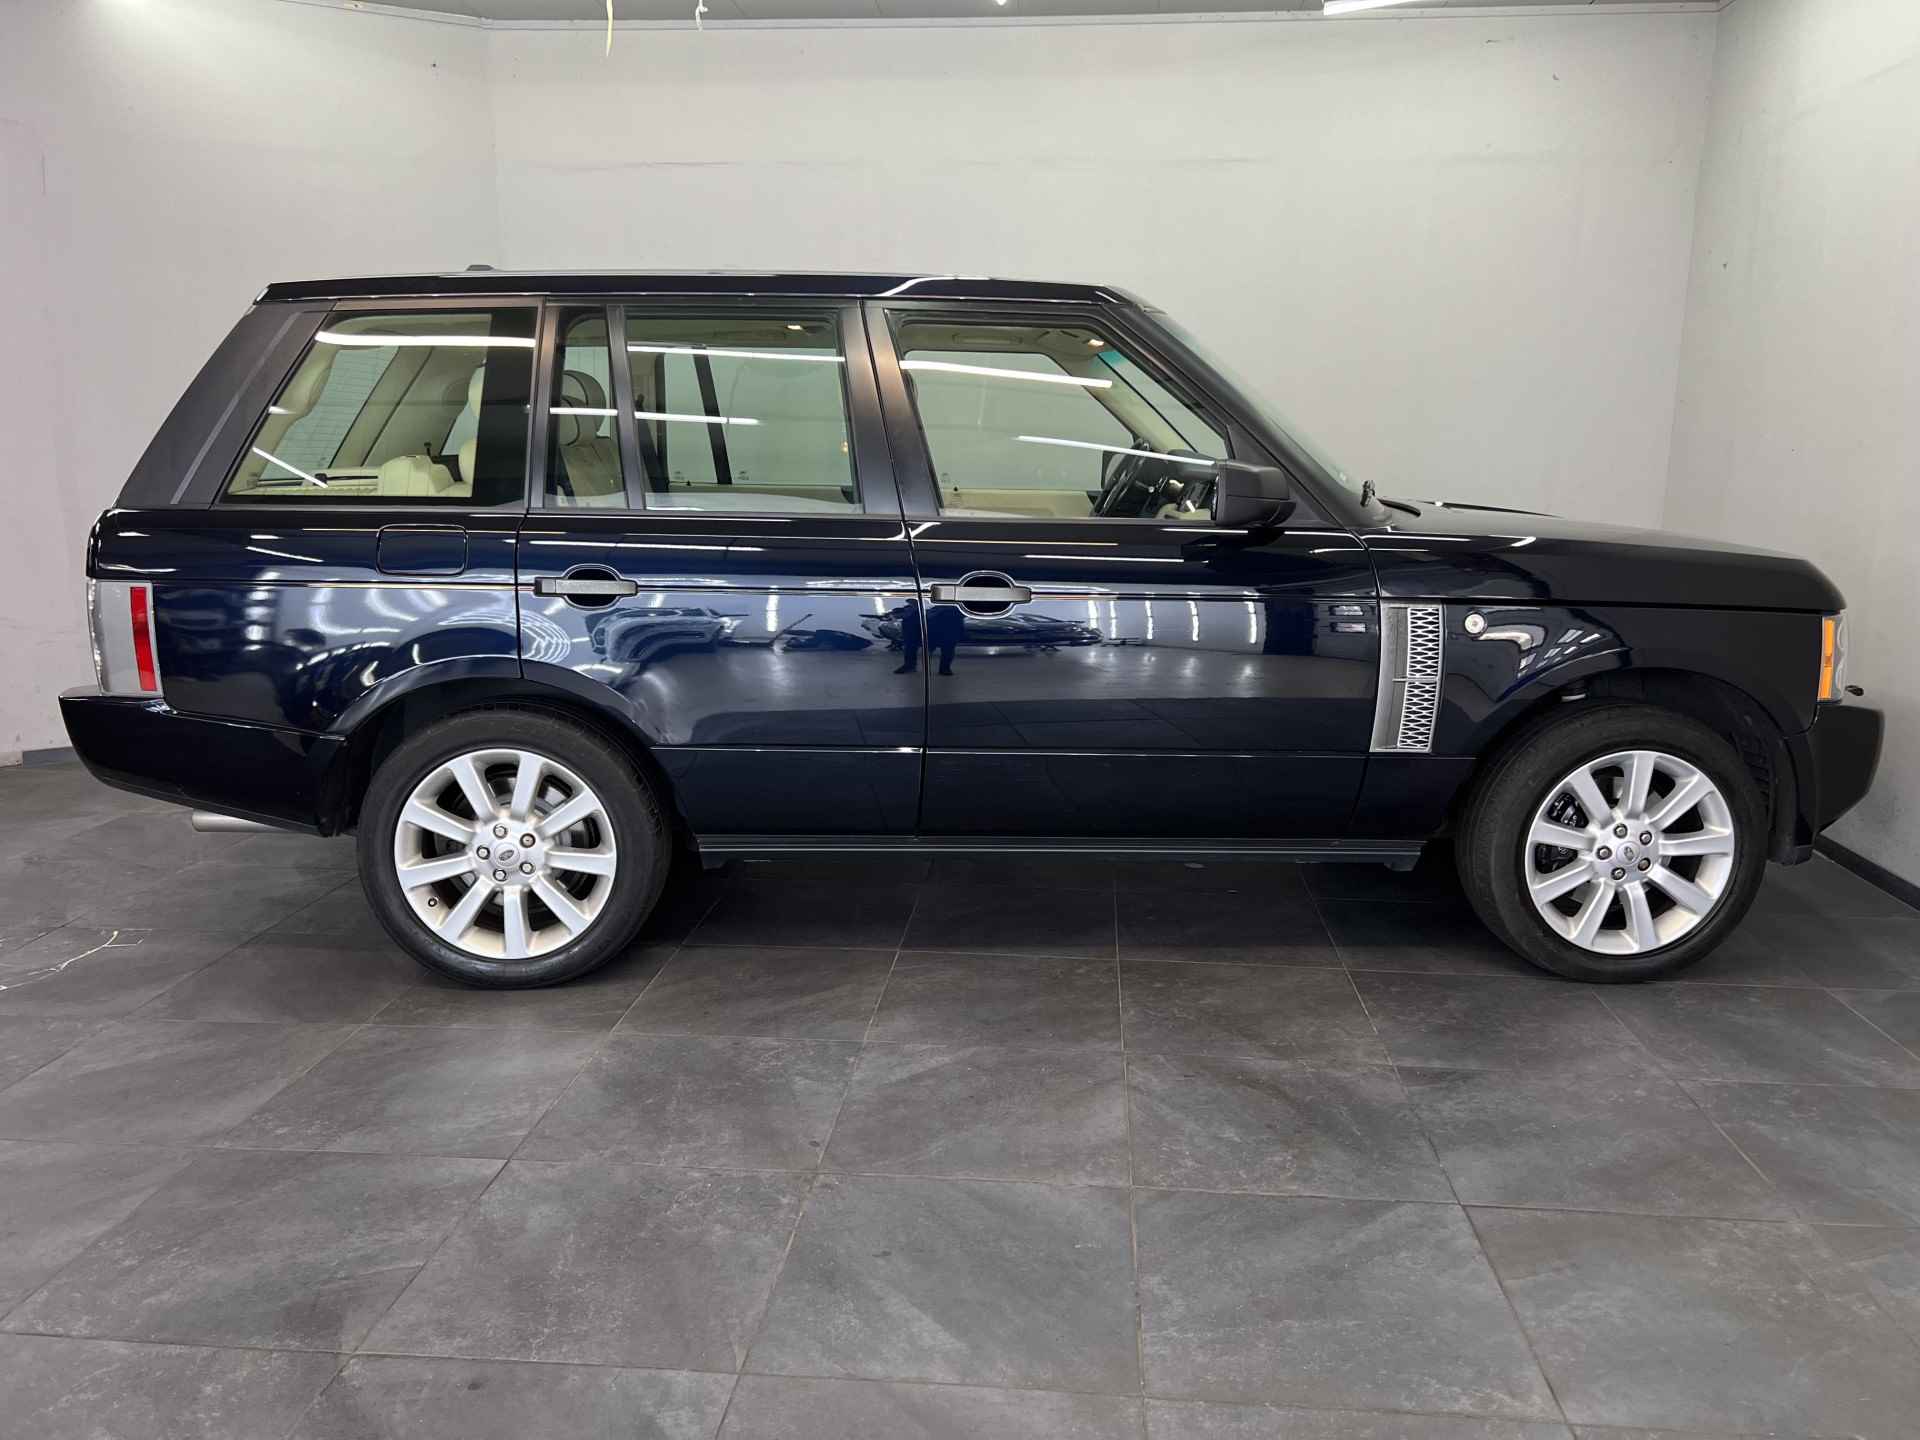 Land Rover Range Rover 4.2 V8 Supercharged ✅UNIEKE STAAT✅Airco✅Cruise controle✅Navigatie✅5 deurs✅TREKHAAK - 30/52